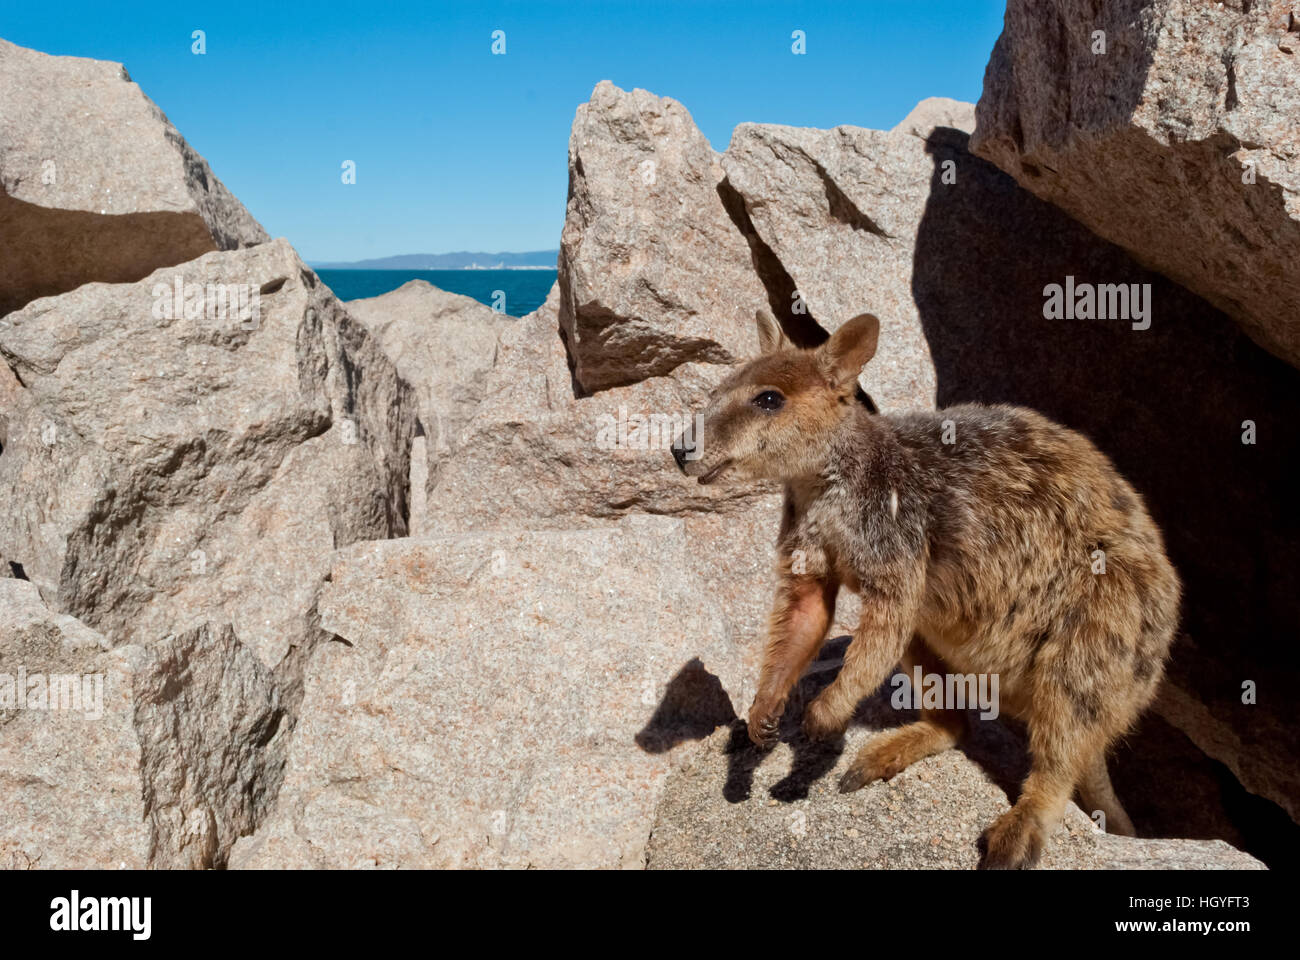 Rock wallaby, Magnetic Island, Australie Banque D'Images